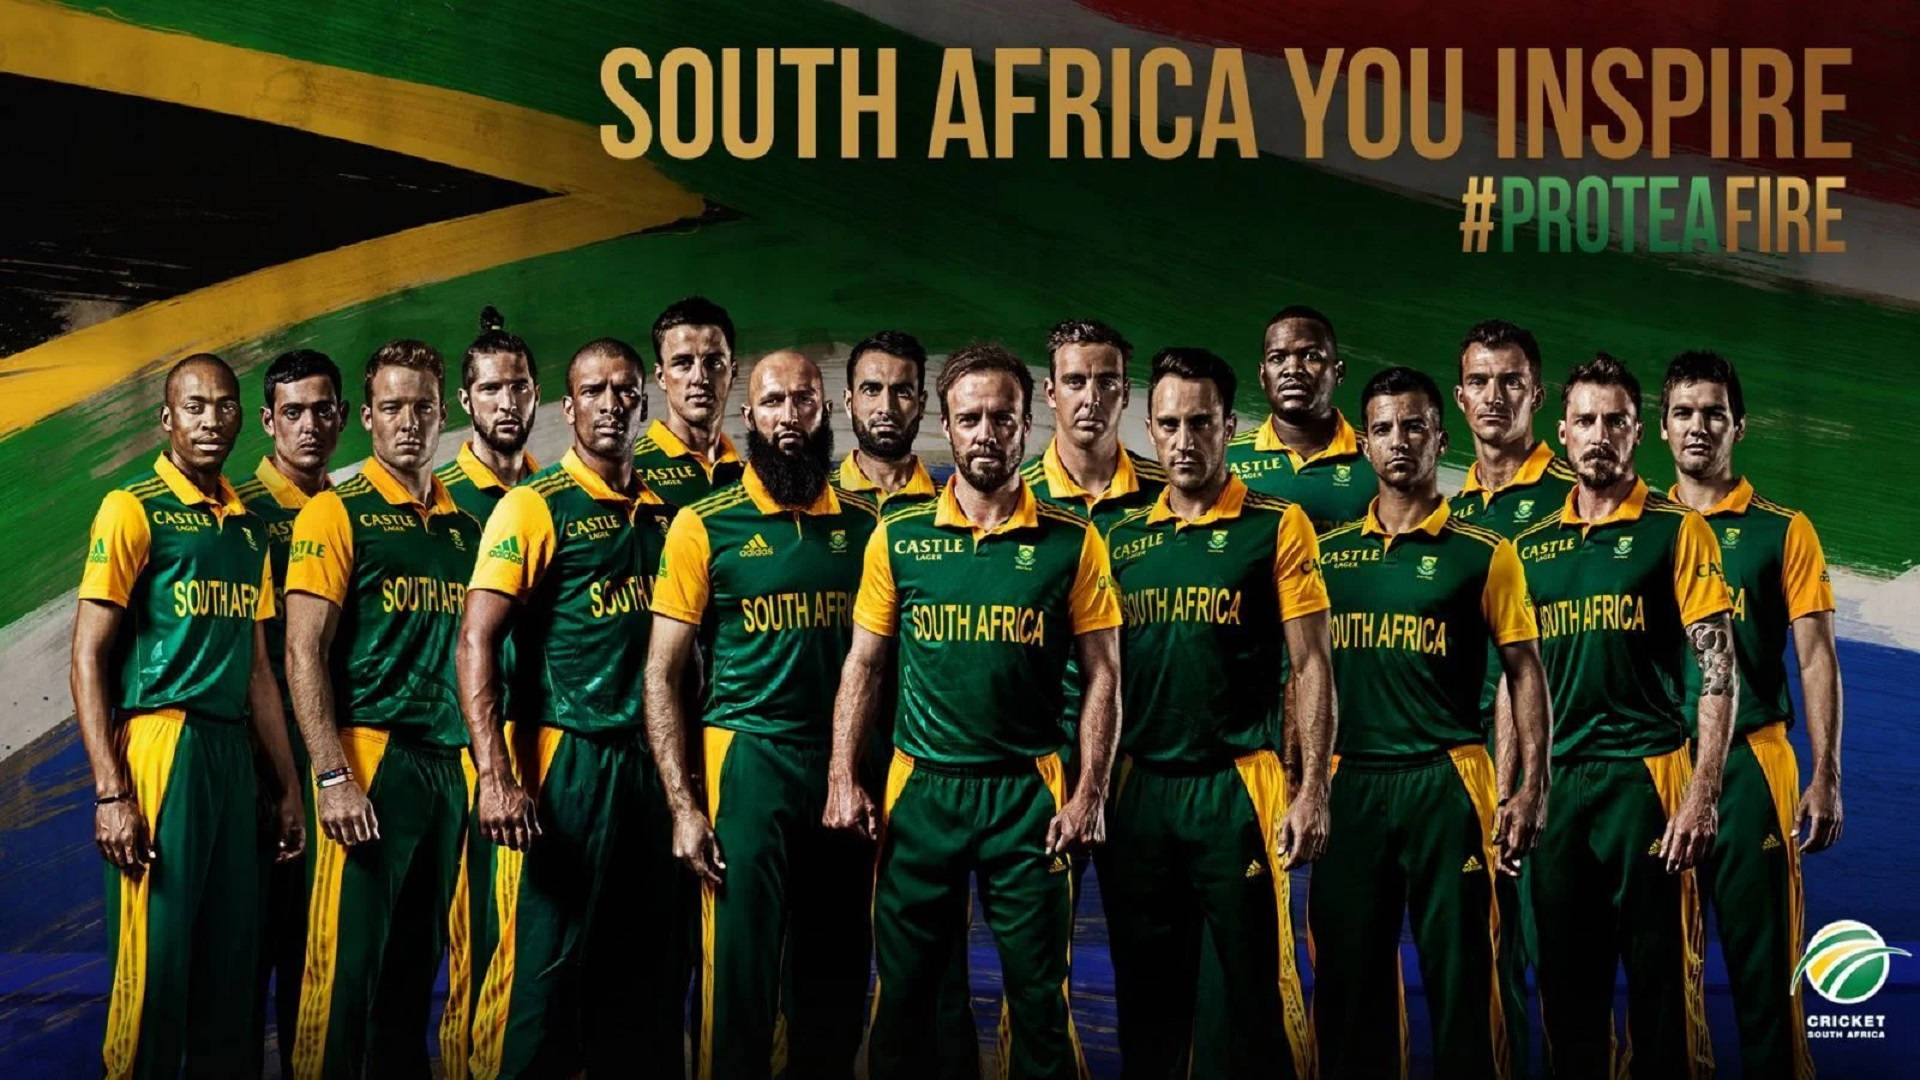 South Africa Cricket Team Poster